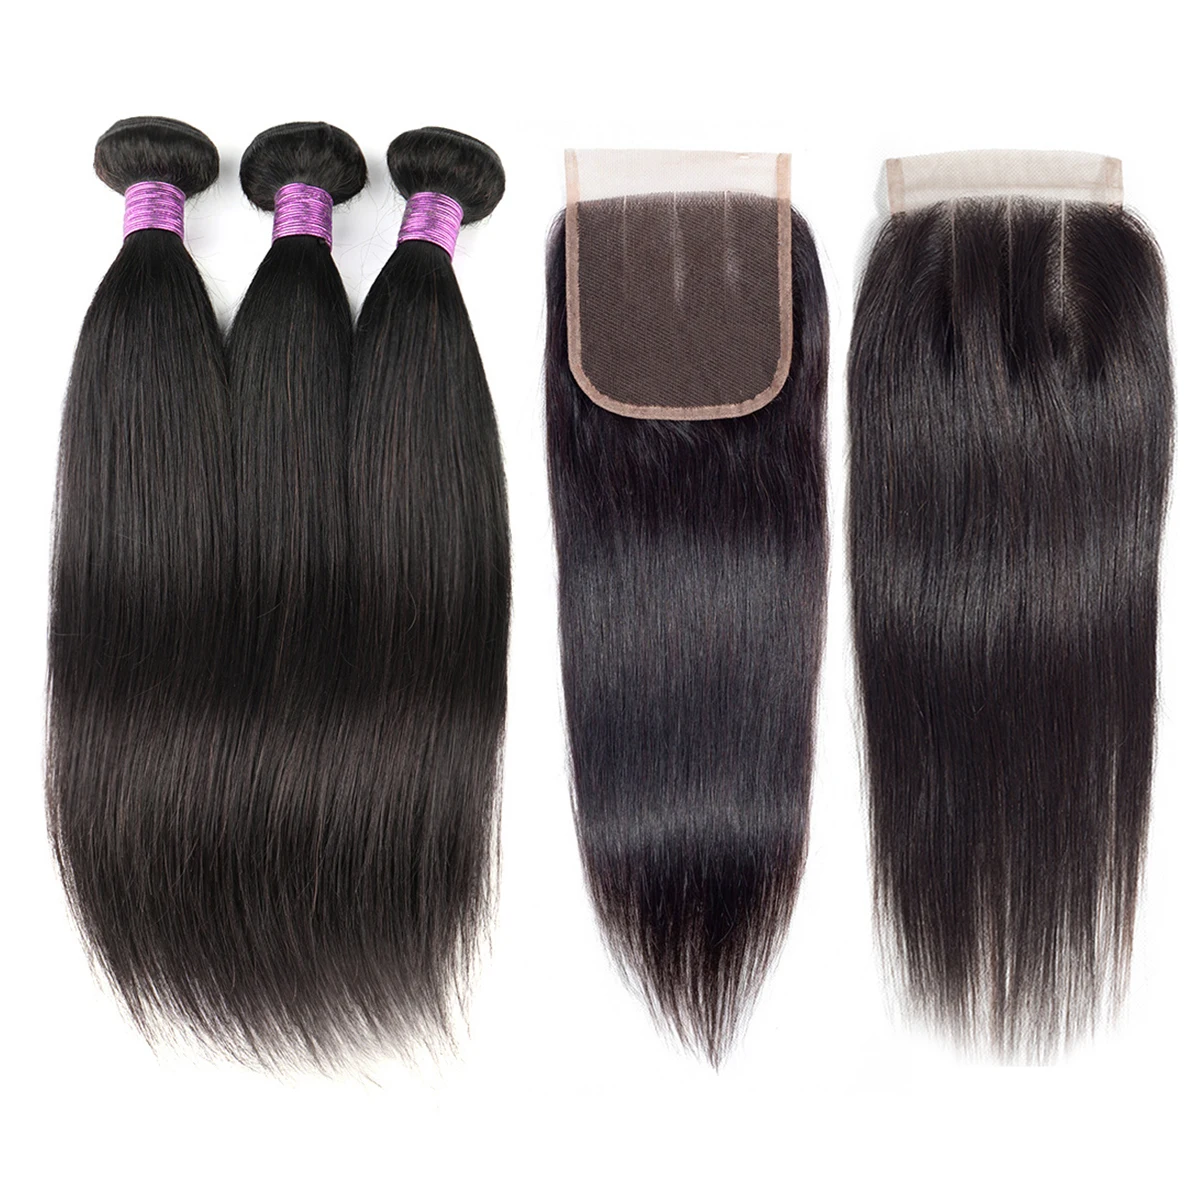 

Bliss 3+1 Straight Hair Bundles with Closure 8A Brazilian Remy Human Hair Bundles Weave Extensions Hair 3 Bundles with Closure